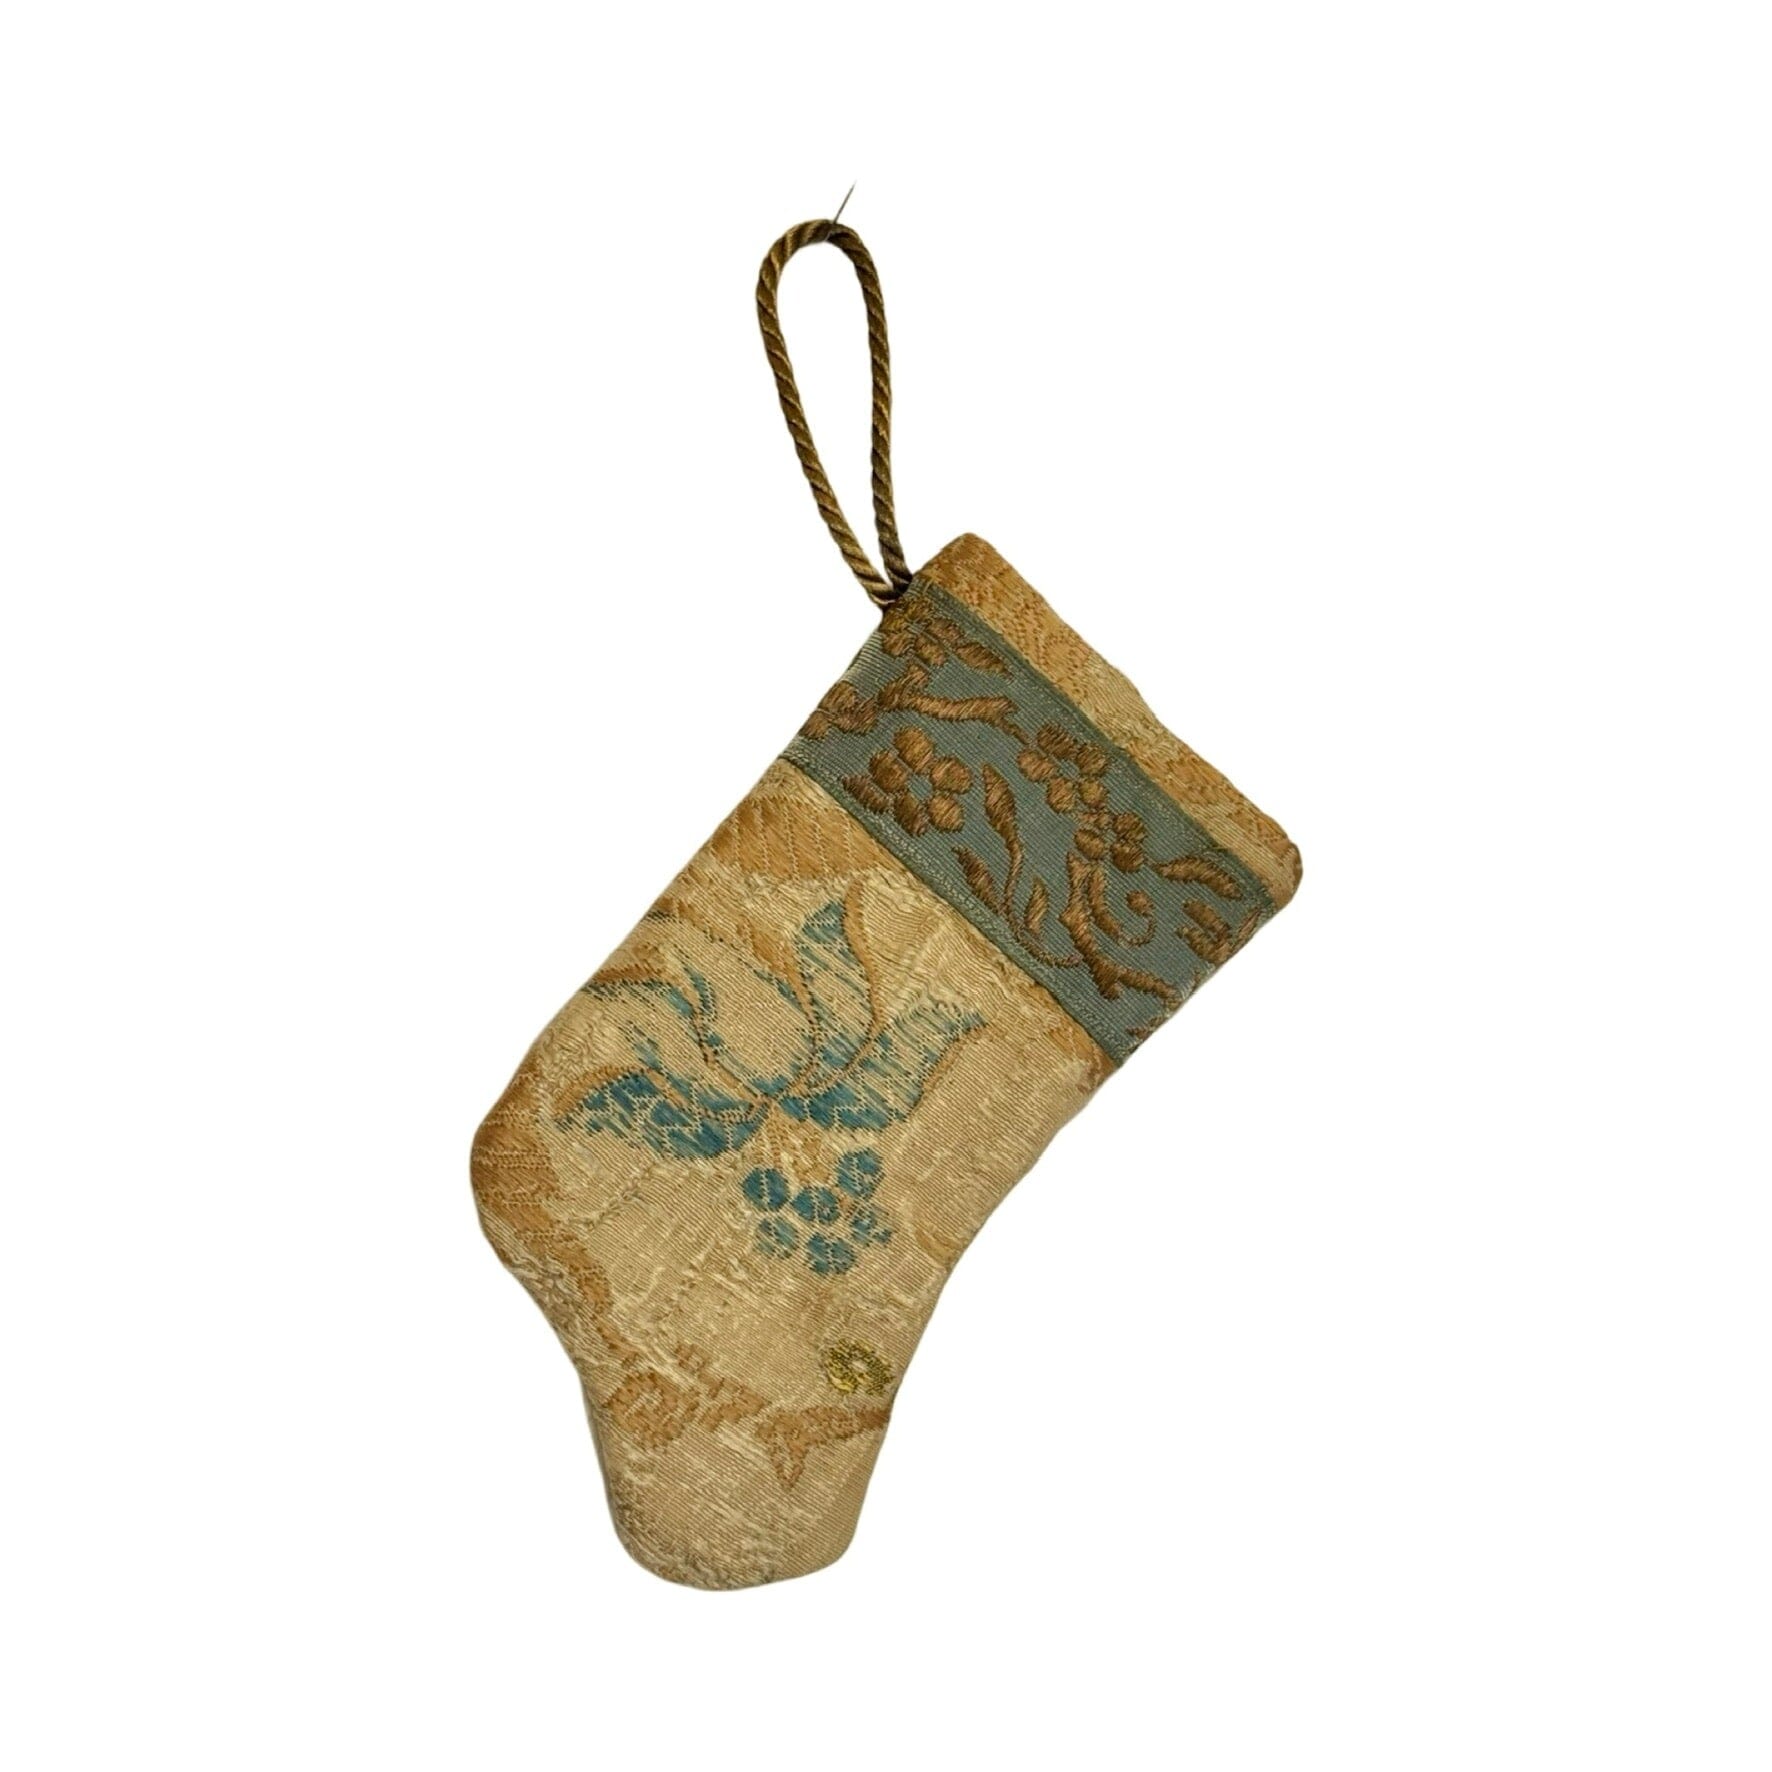 Handmade Mini Stocking Made From Vintage Fabric and Trims- Champagne Embroidery Ornament B. Viz Design H 